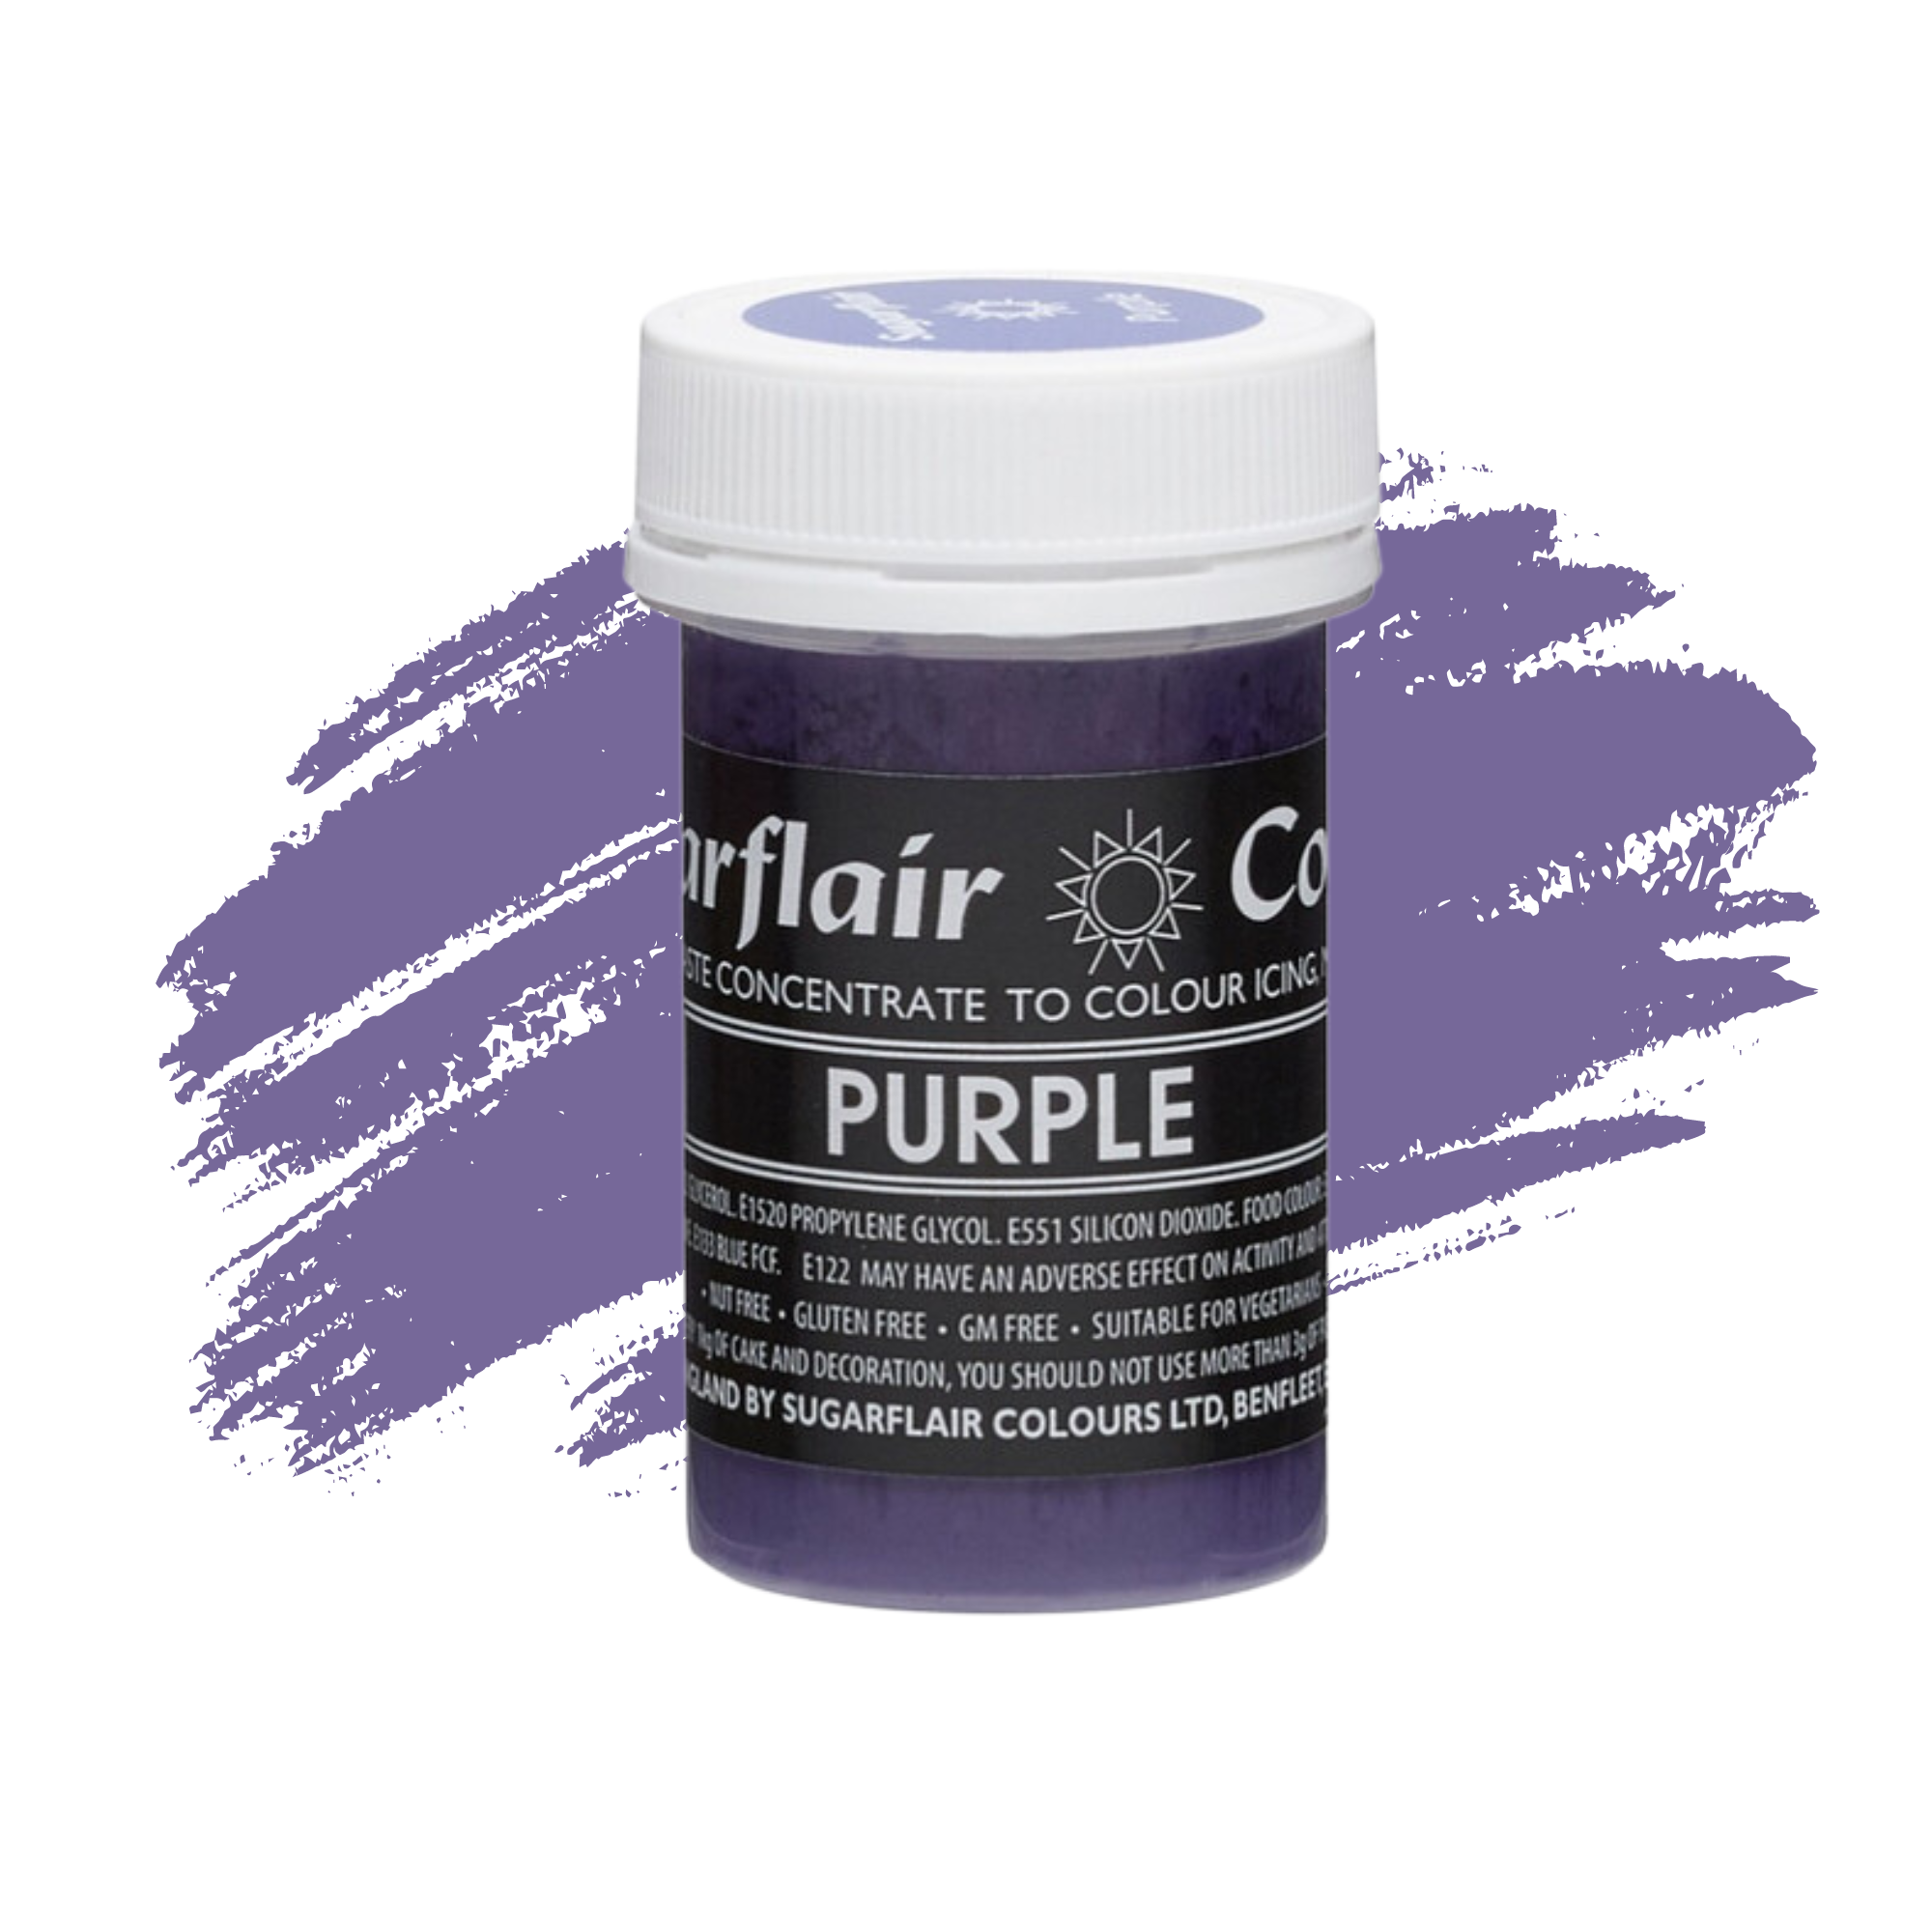 Sugarflair Paste Colours Concentrated Food Colouring - Pastel Purple - 25g